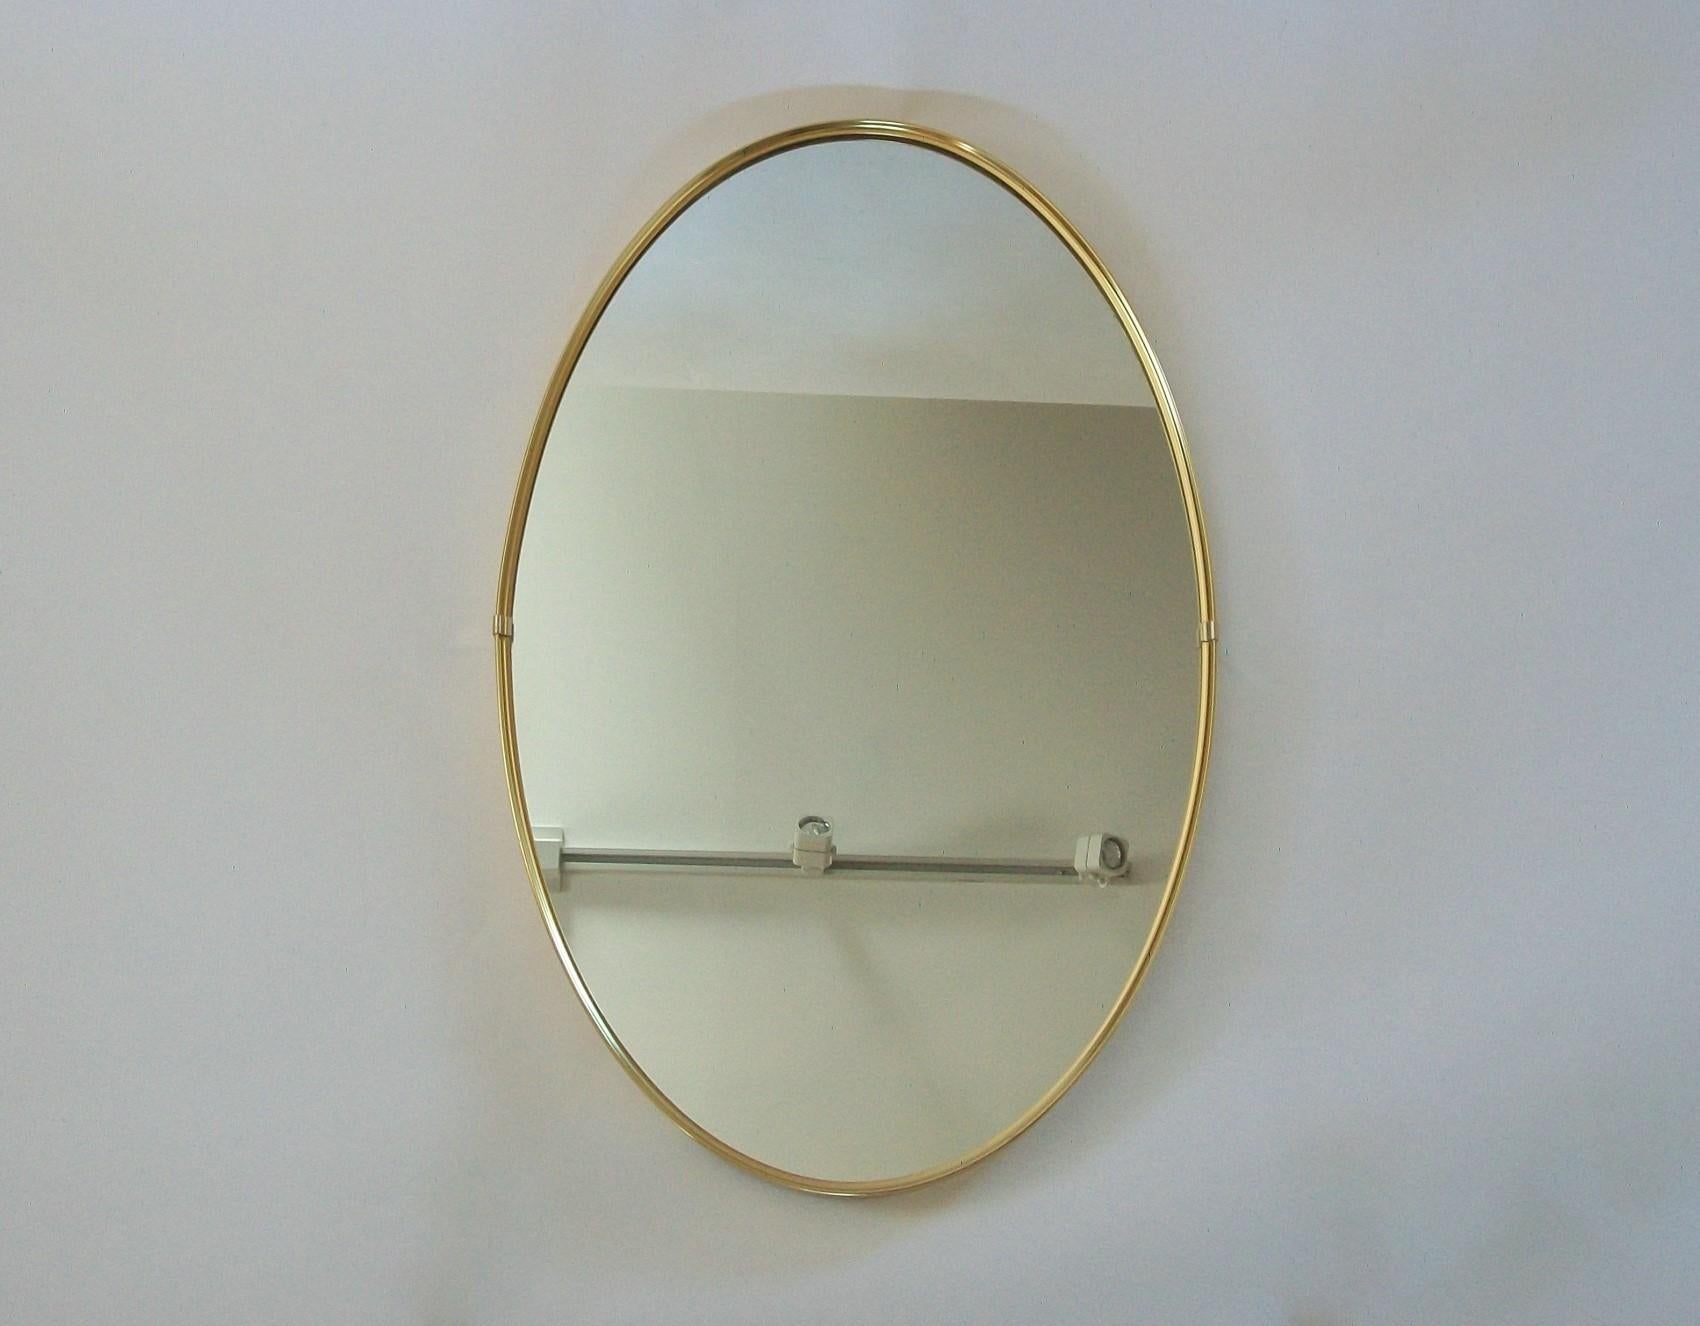 Hand-Crafted Midcentury Oval Brass Framed Mirror, Italy, circa 1970s